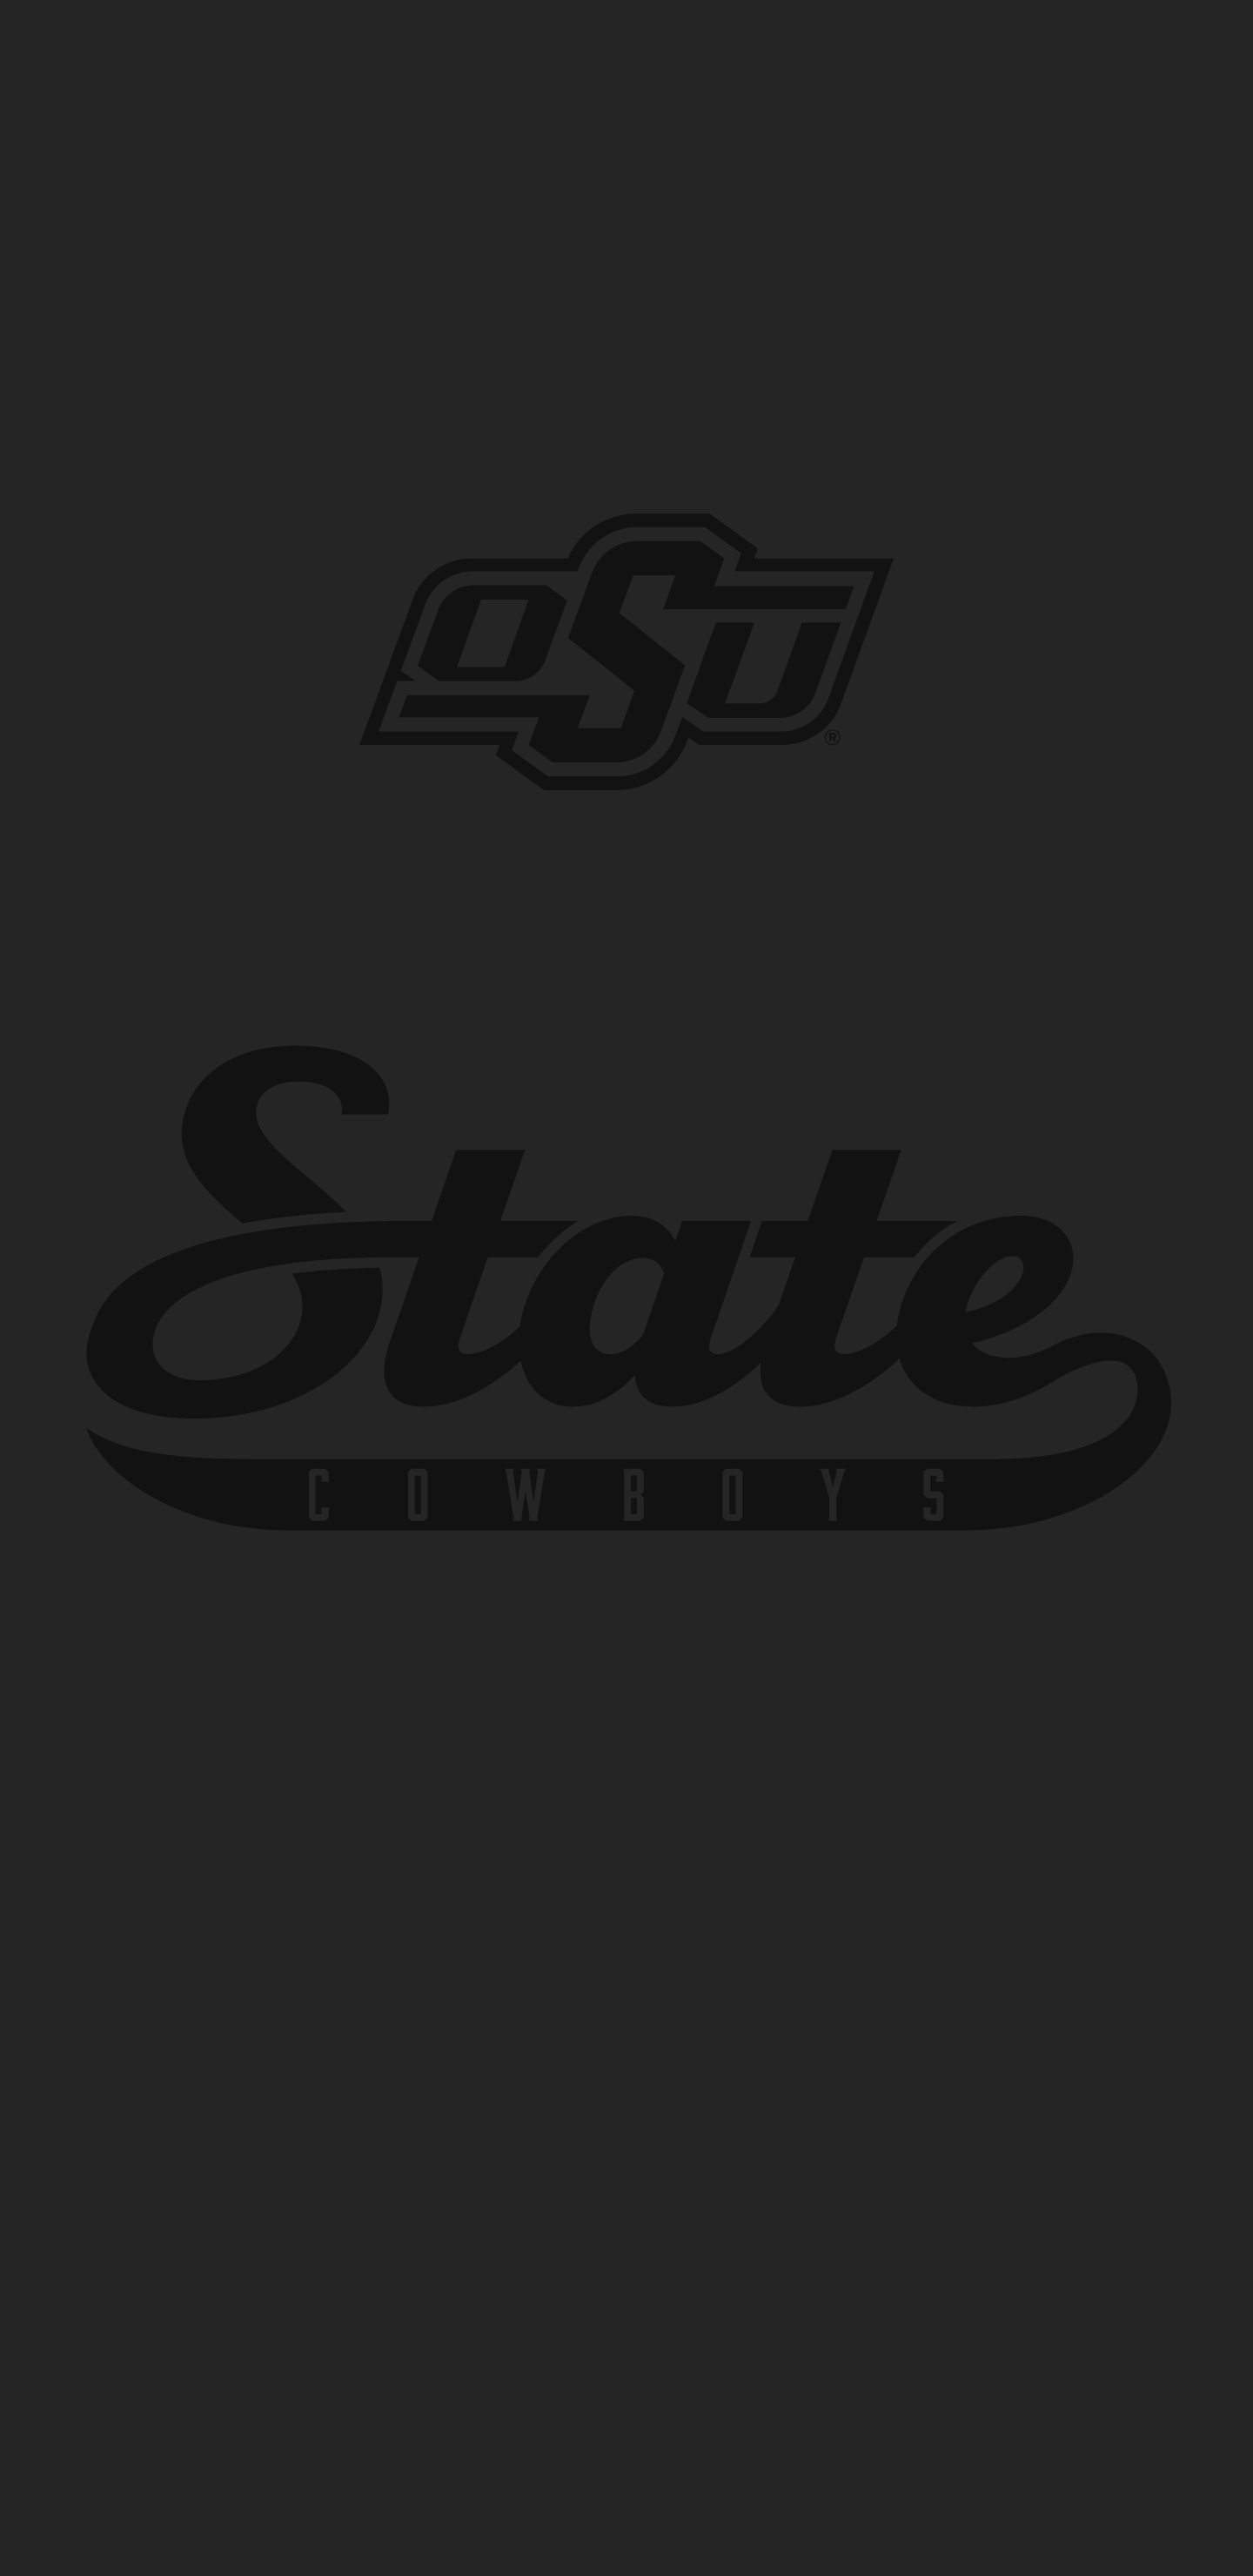 States Wallpapers